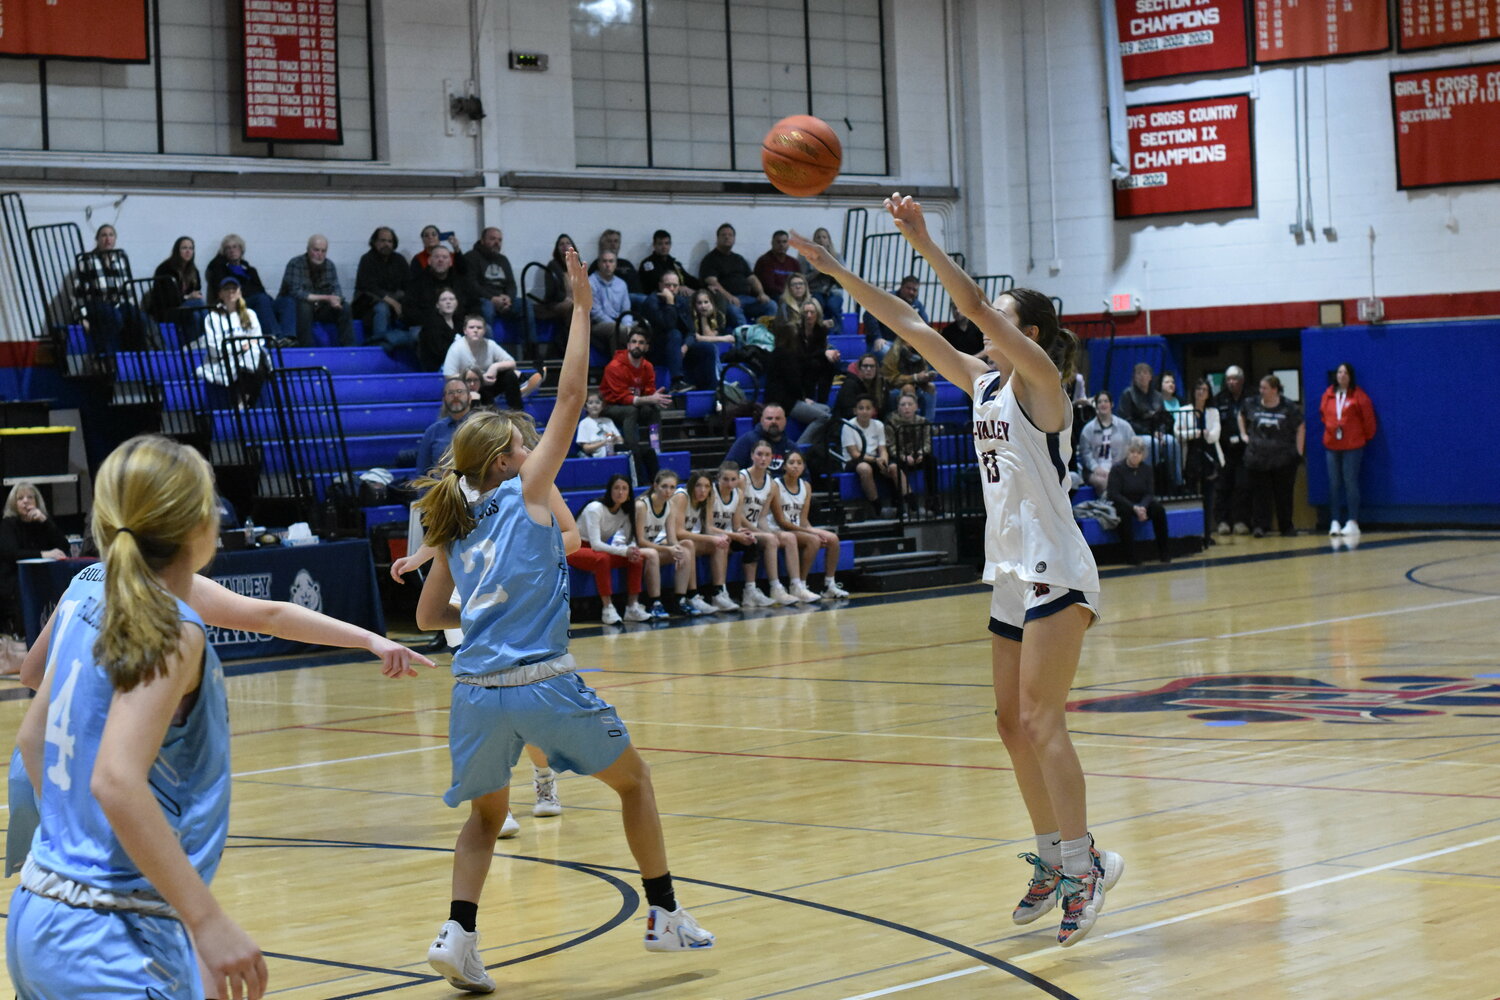 Tri-Valley’s Jenna Carmody, who scored a team-high 11 points, takes an open jumpshot.